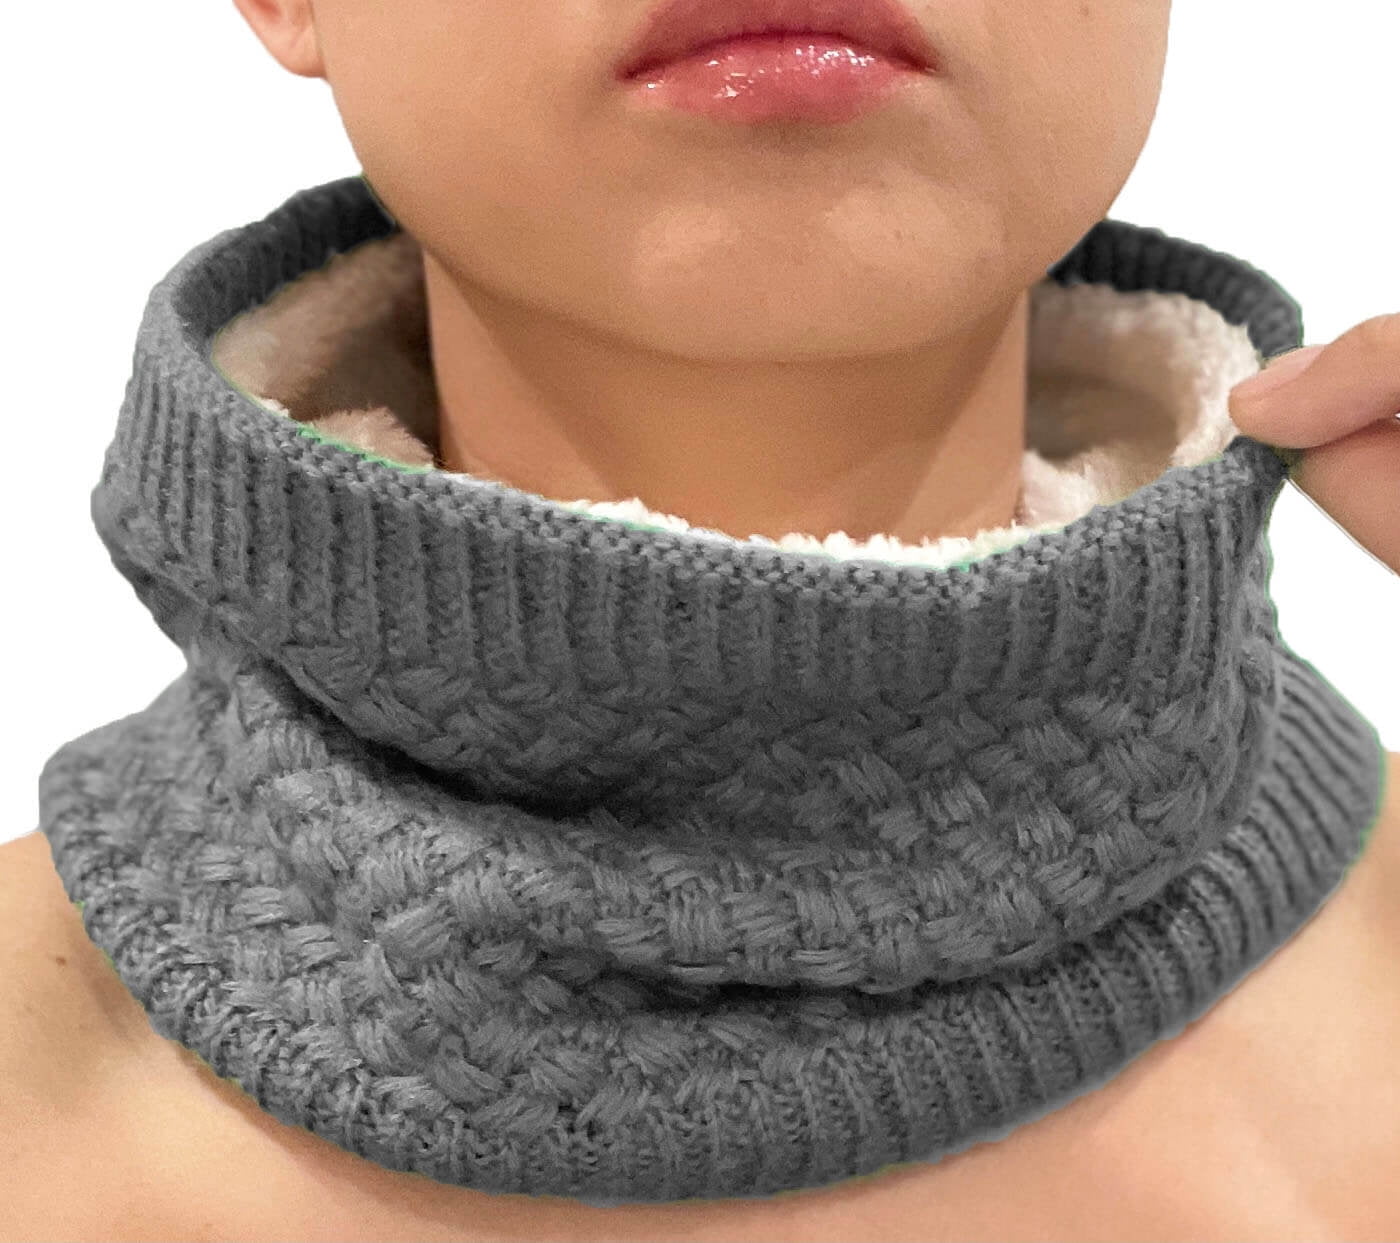 Winter Knit Neck Warmer Tube Old) Gray) 12 for to Inside (Heather Year (Preschoolers Scarf Furry Kids